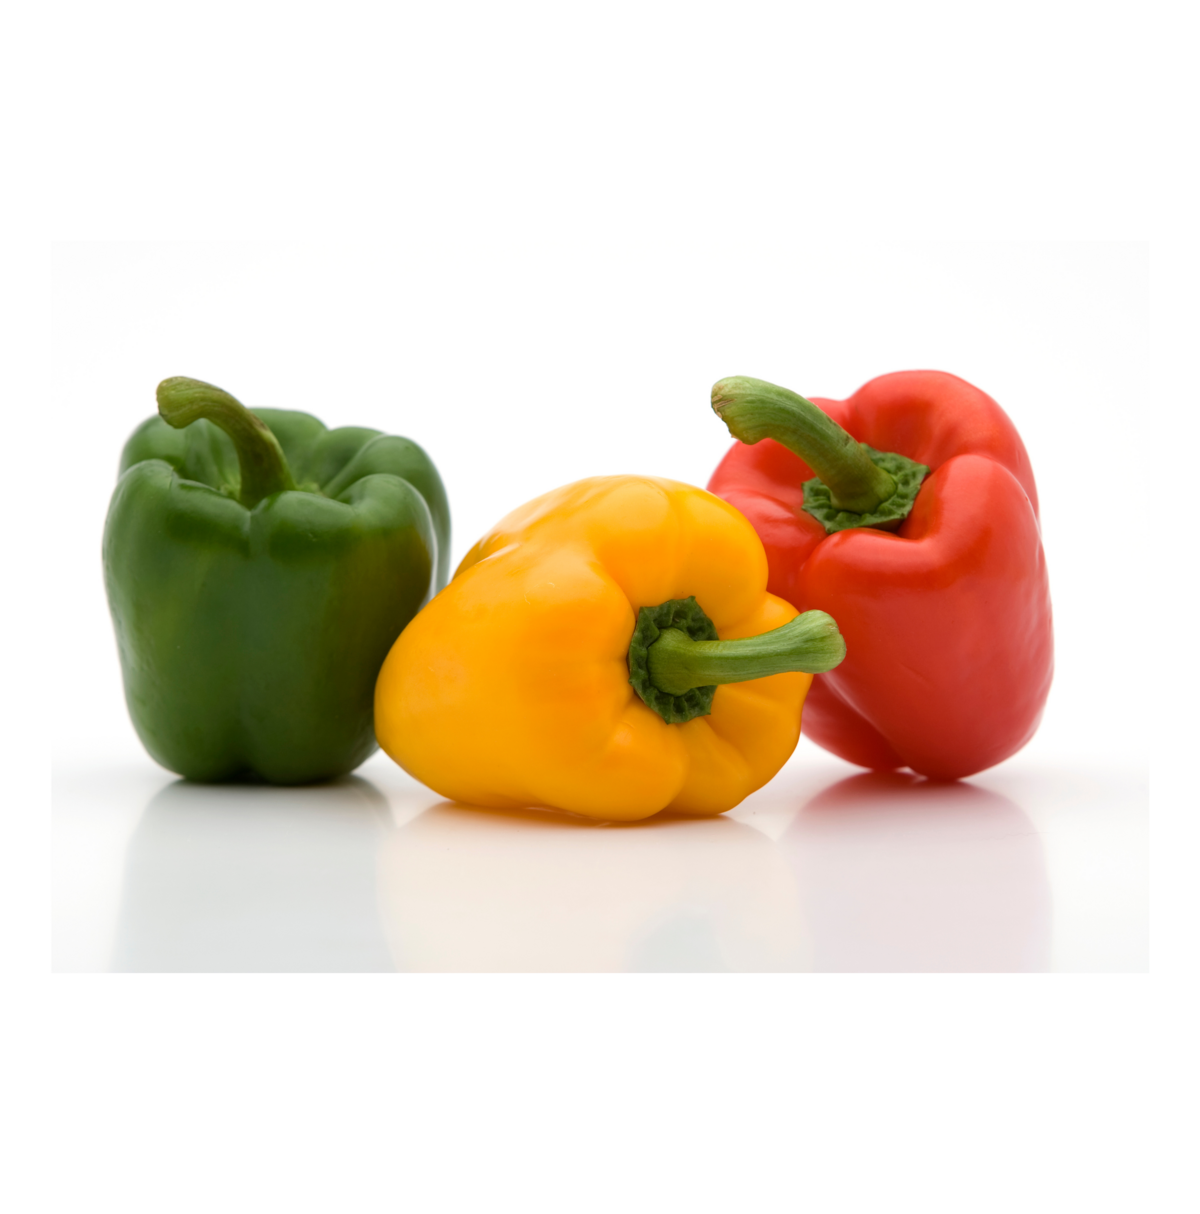 Bell pepper cultivation for the best quality bell pepper